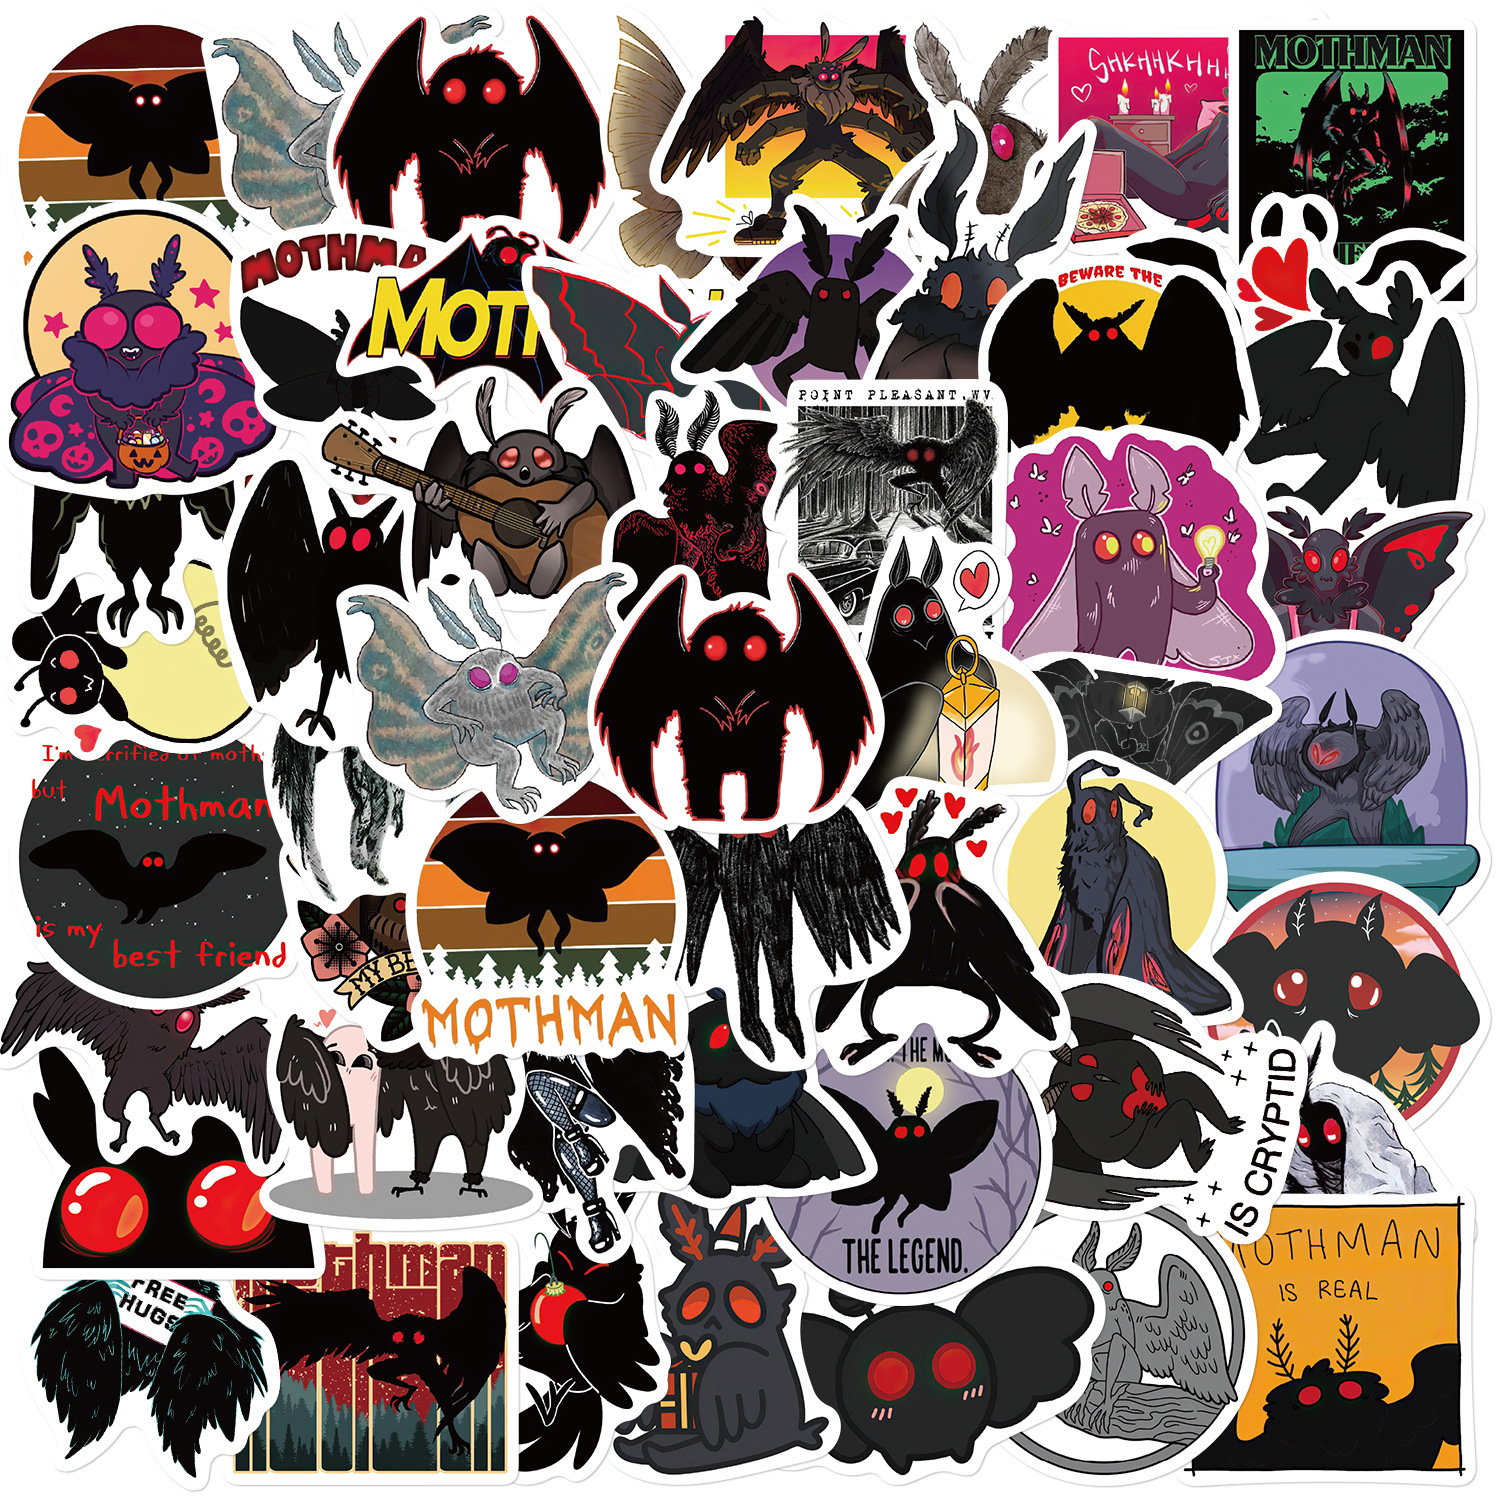 50pcs Cute Cartoon Mothman Stickers Graffiti Sticker for Laptop Motorcycle Luagage Decal Guitar Stickers wholesalers